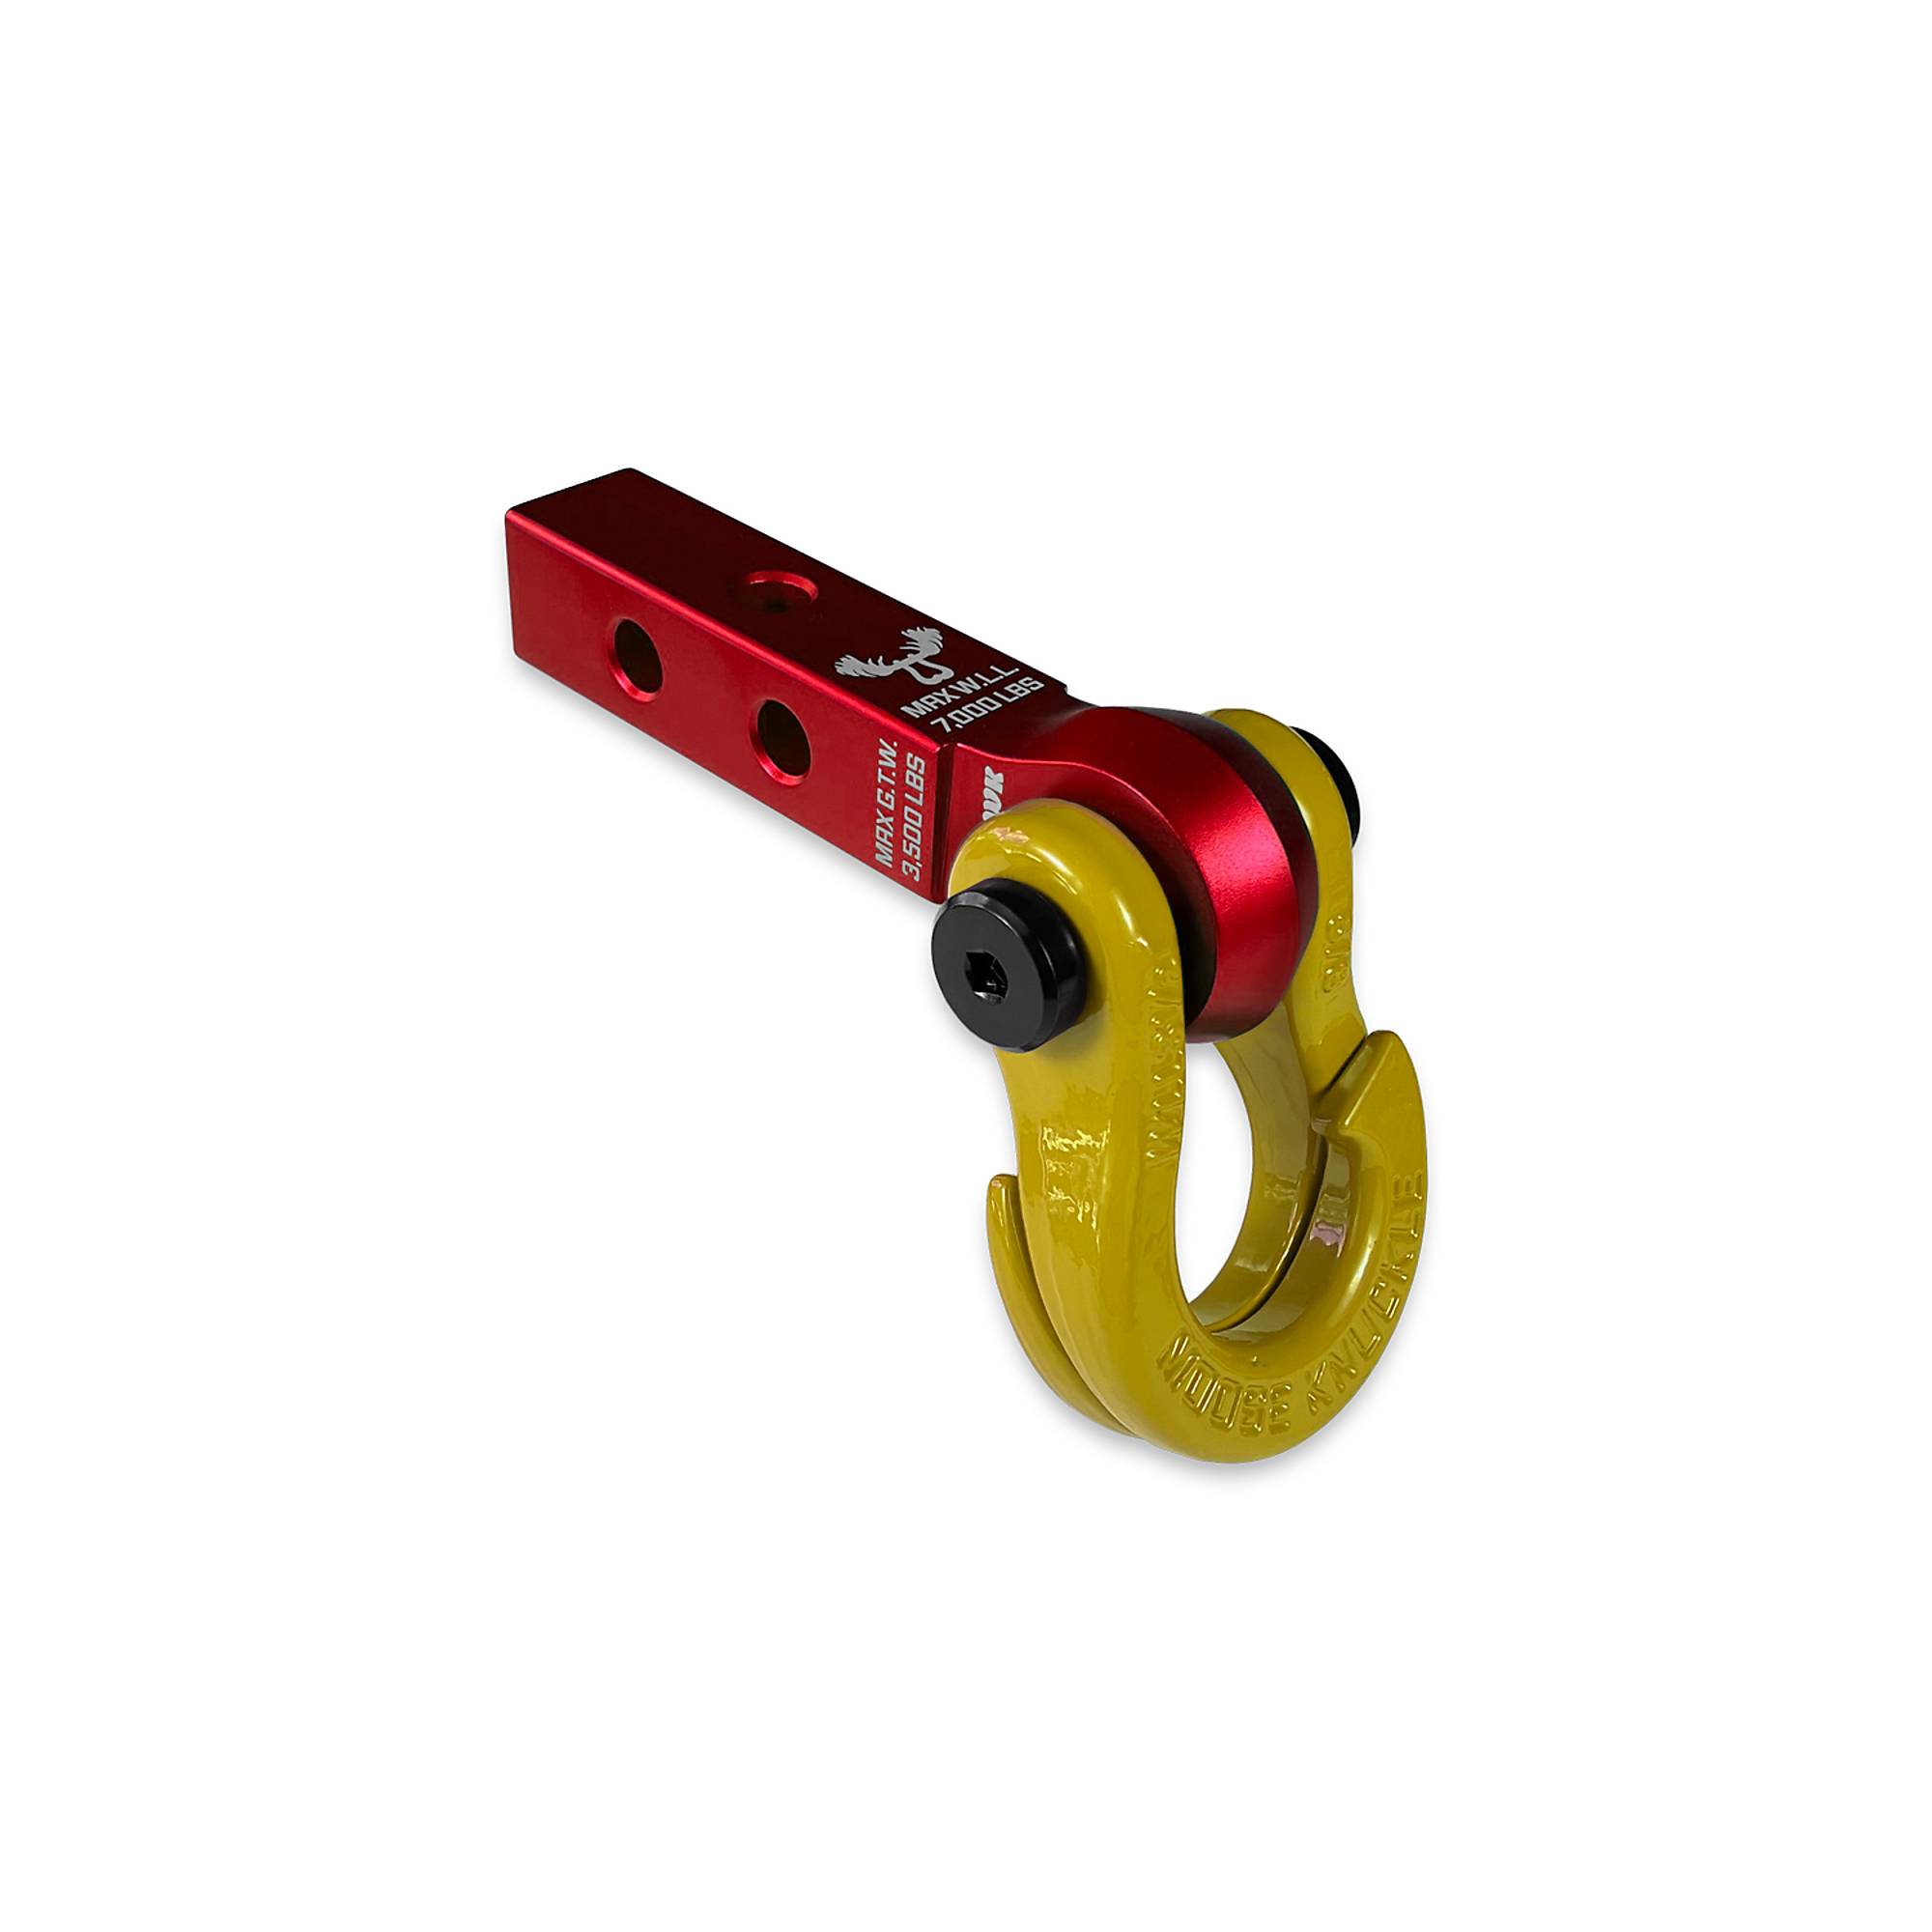 Moose Knuckle Offroad, 5/8 Jowl Split Shackle and Mohawk 1.25 Receiver Combo, Gross Towing Weight 3500 lb, Class Rating Class II, Model FN000044-004